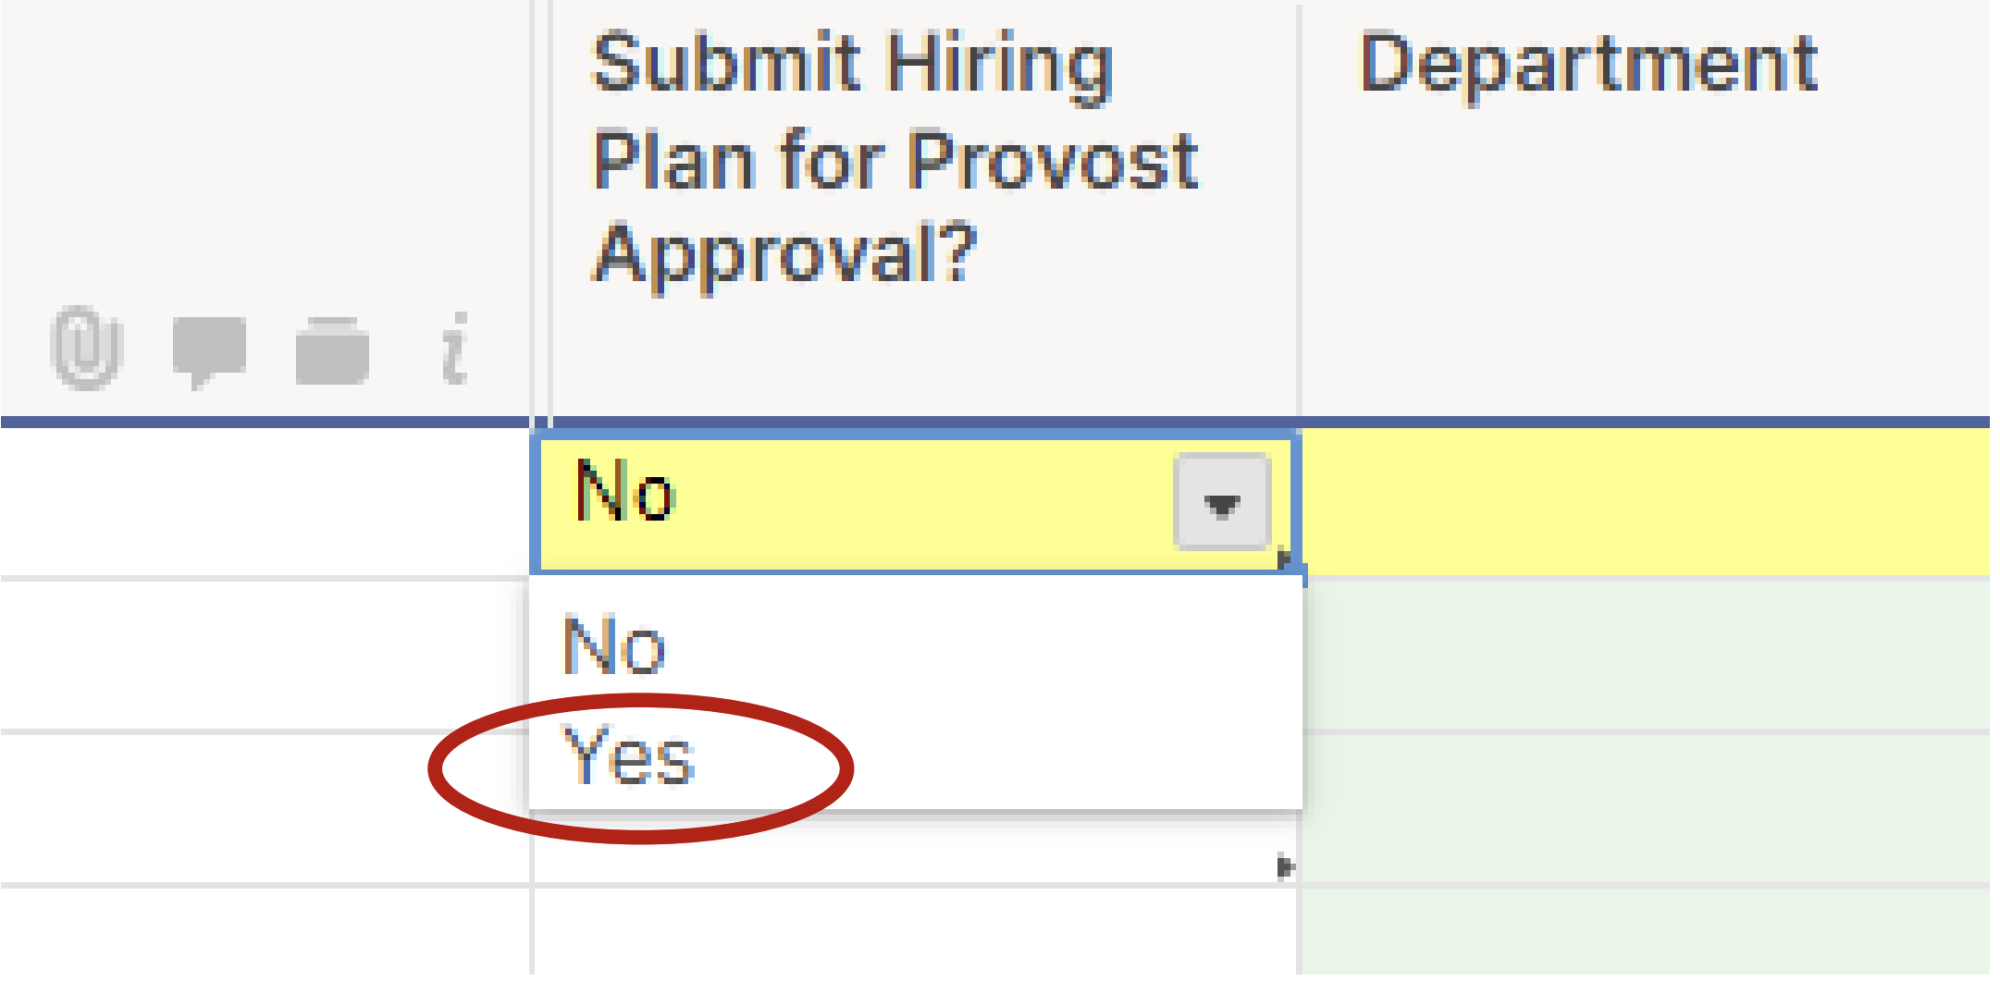 showing question "Submit Hiring Plan for Provost Approval?" with drop down options of "No" and "Yes" with a red circle around "Yes"